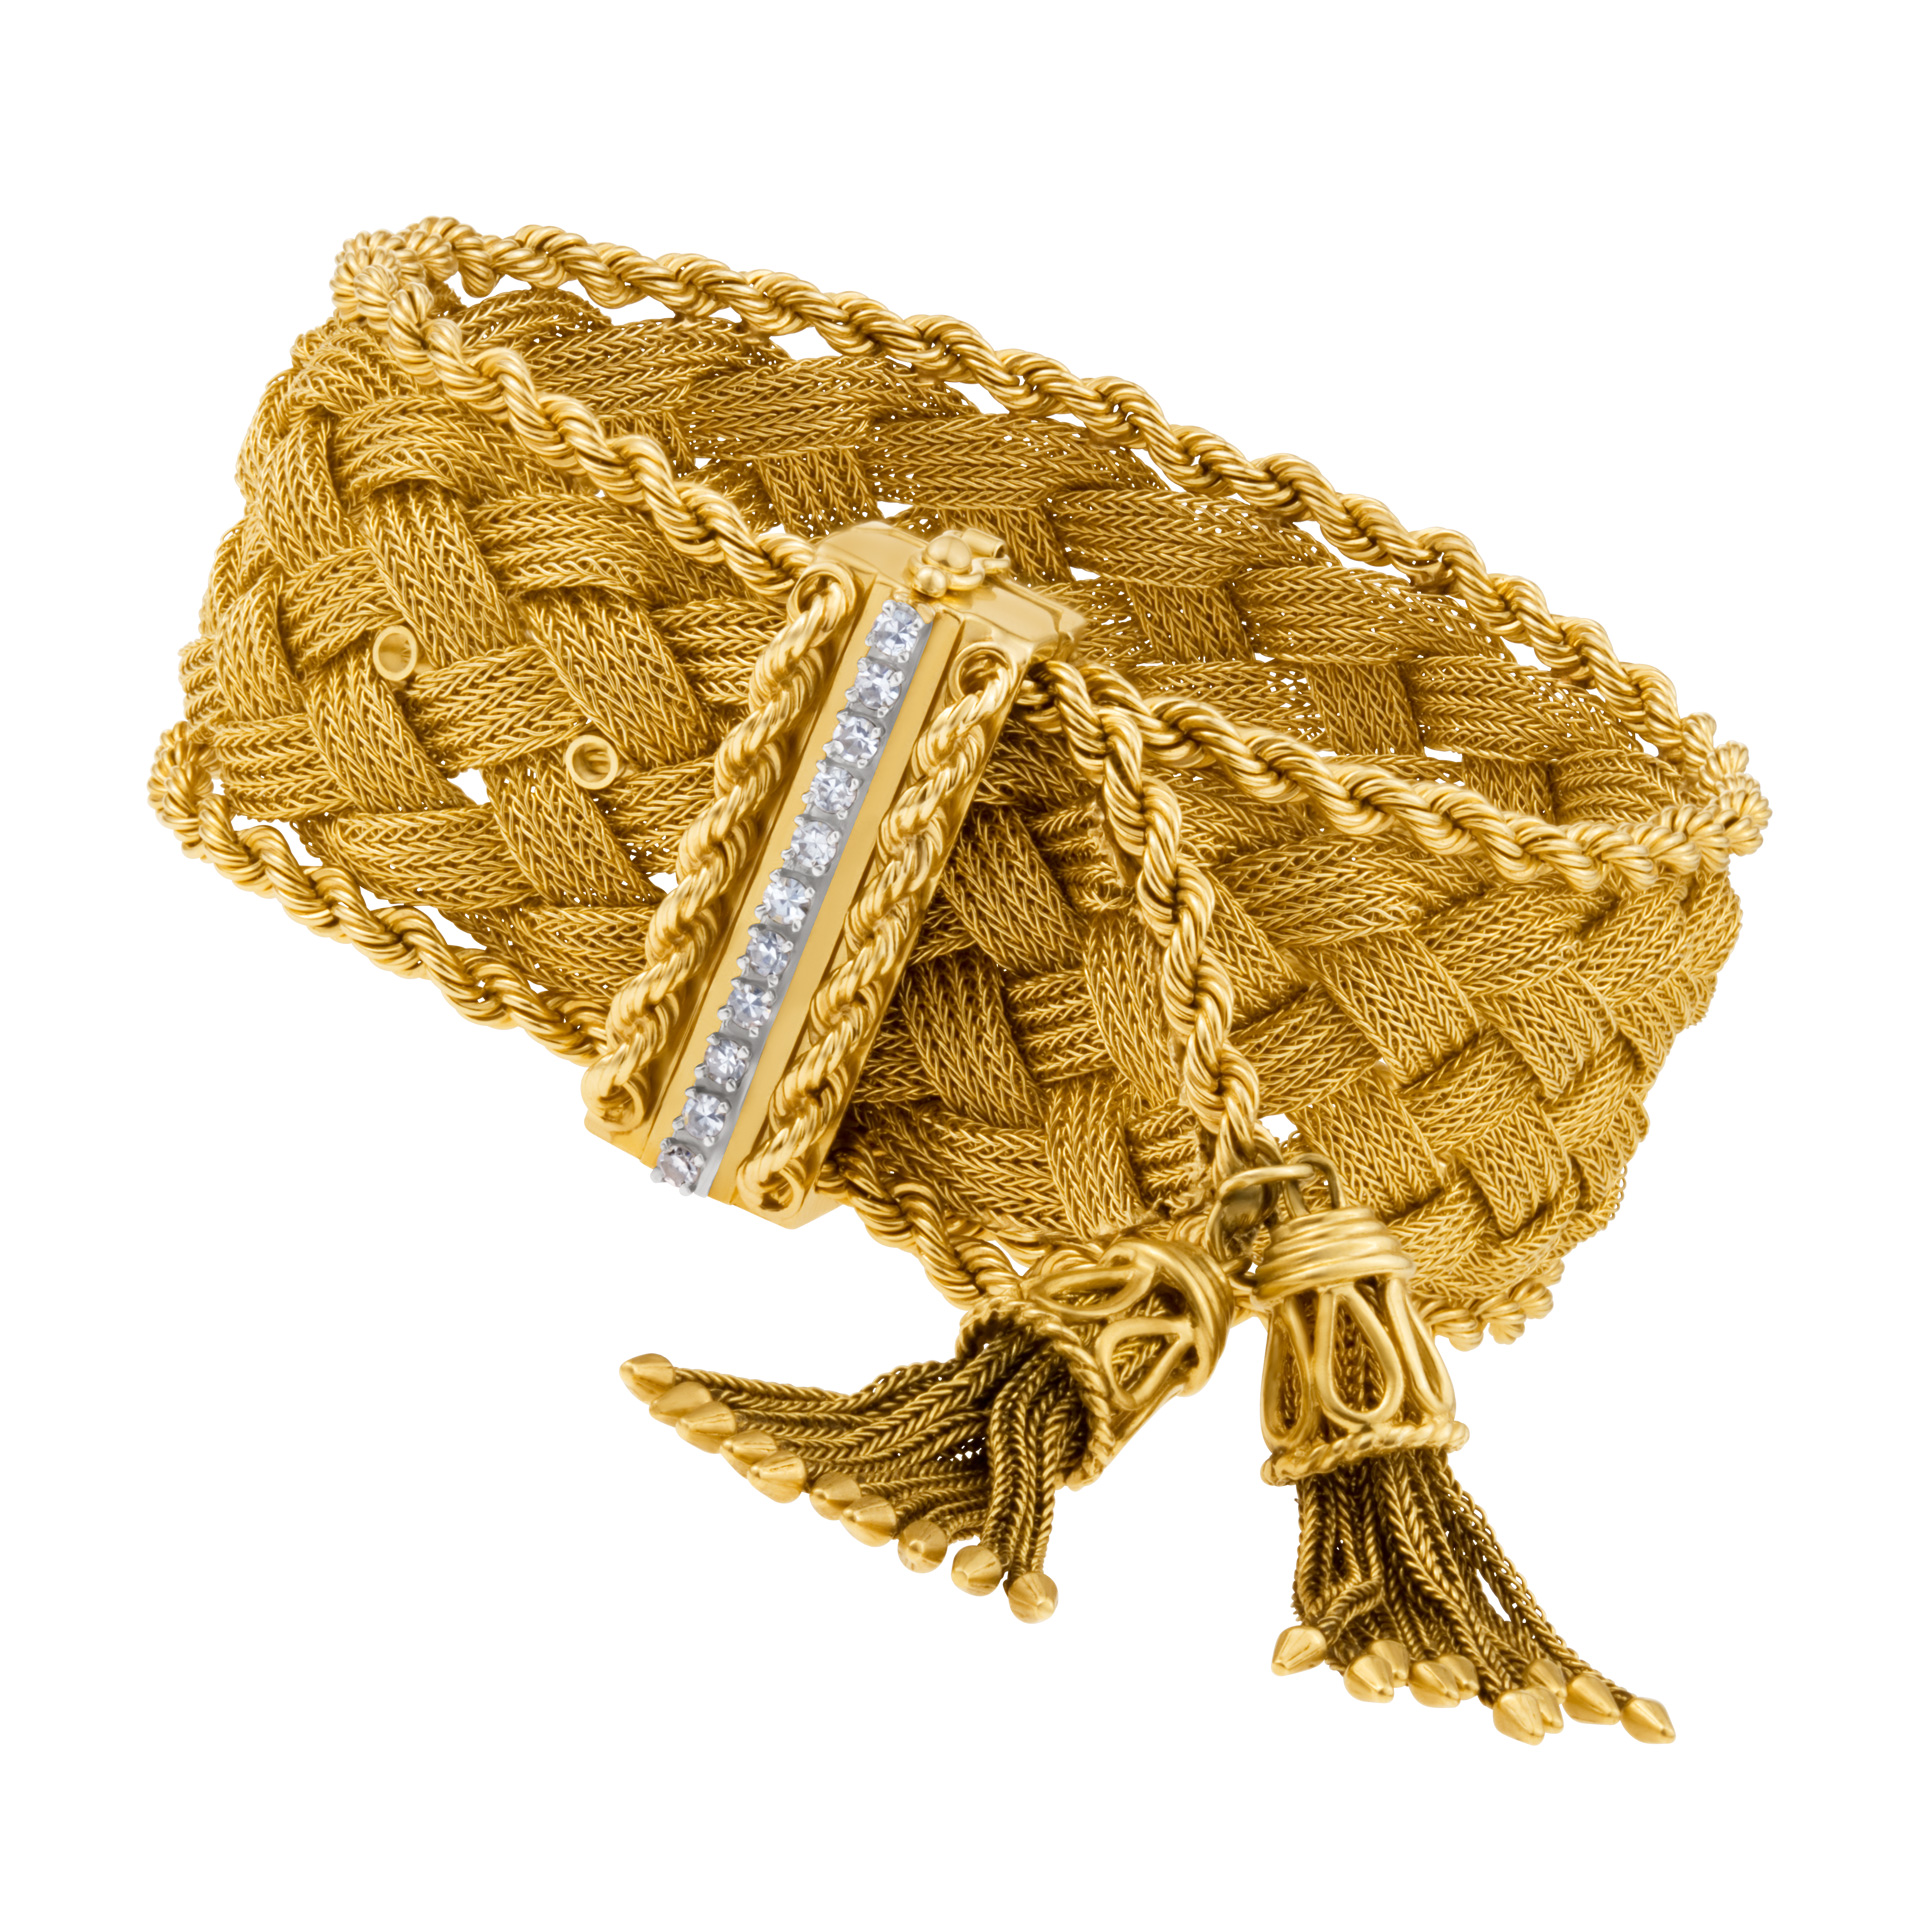 Braided woven bracelet in 14k with diamond bar across clasp & tassle accents. Circa 1950's. image 1